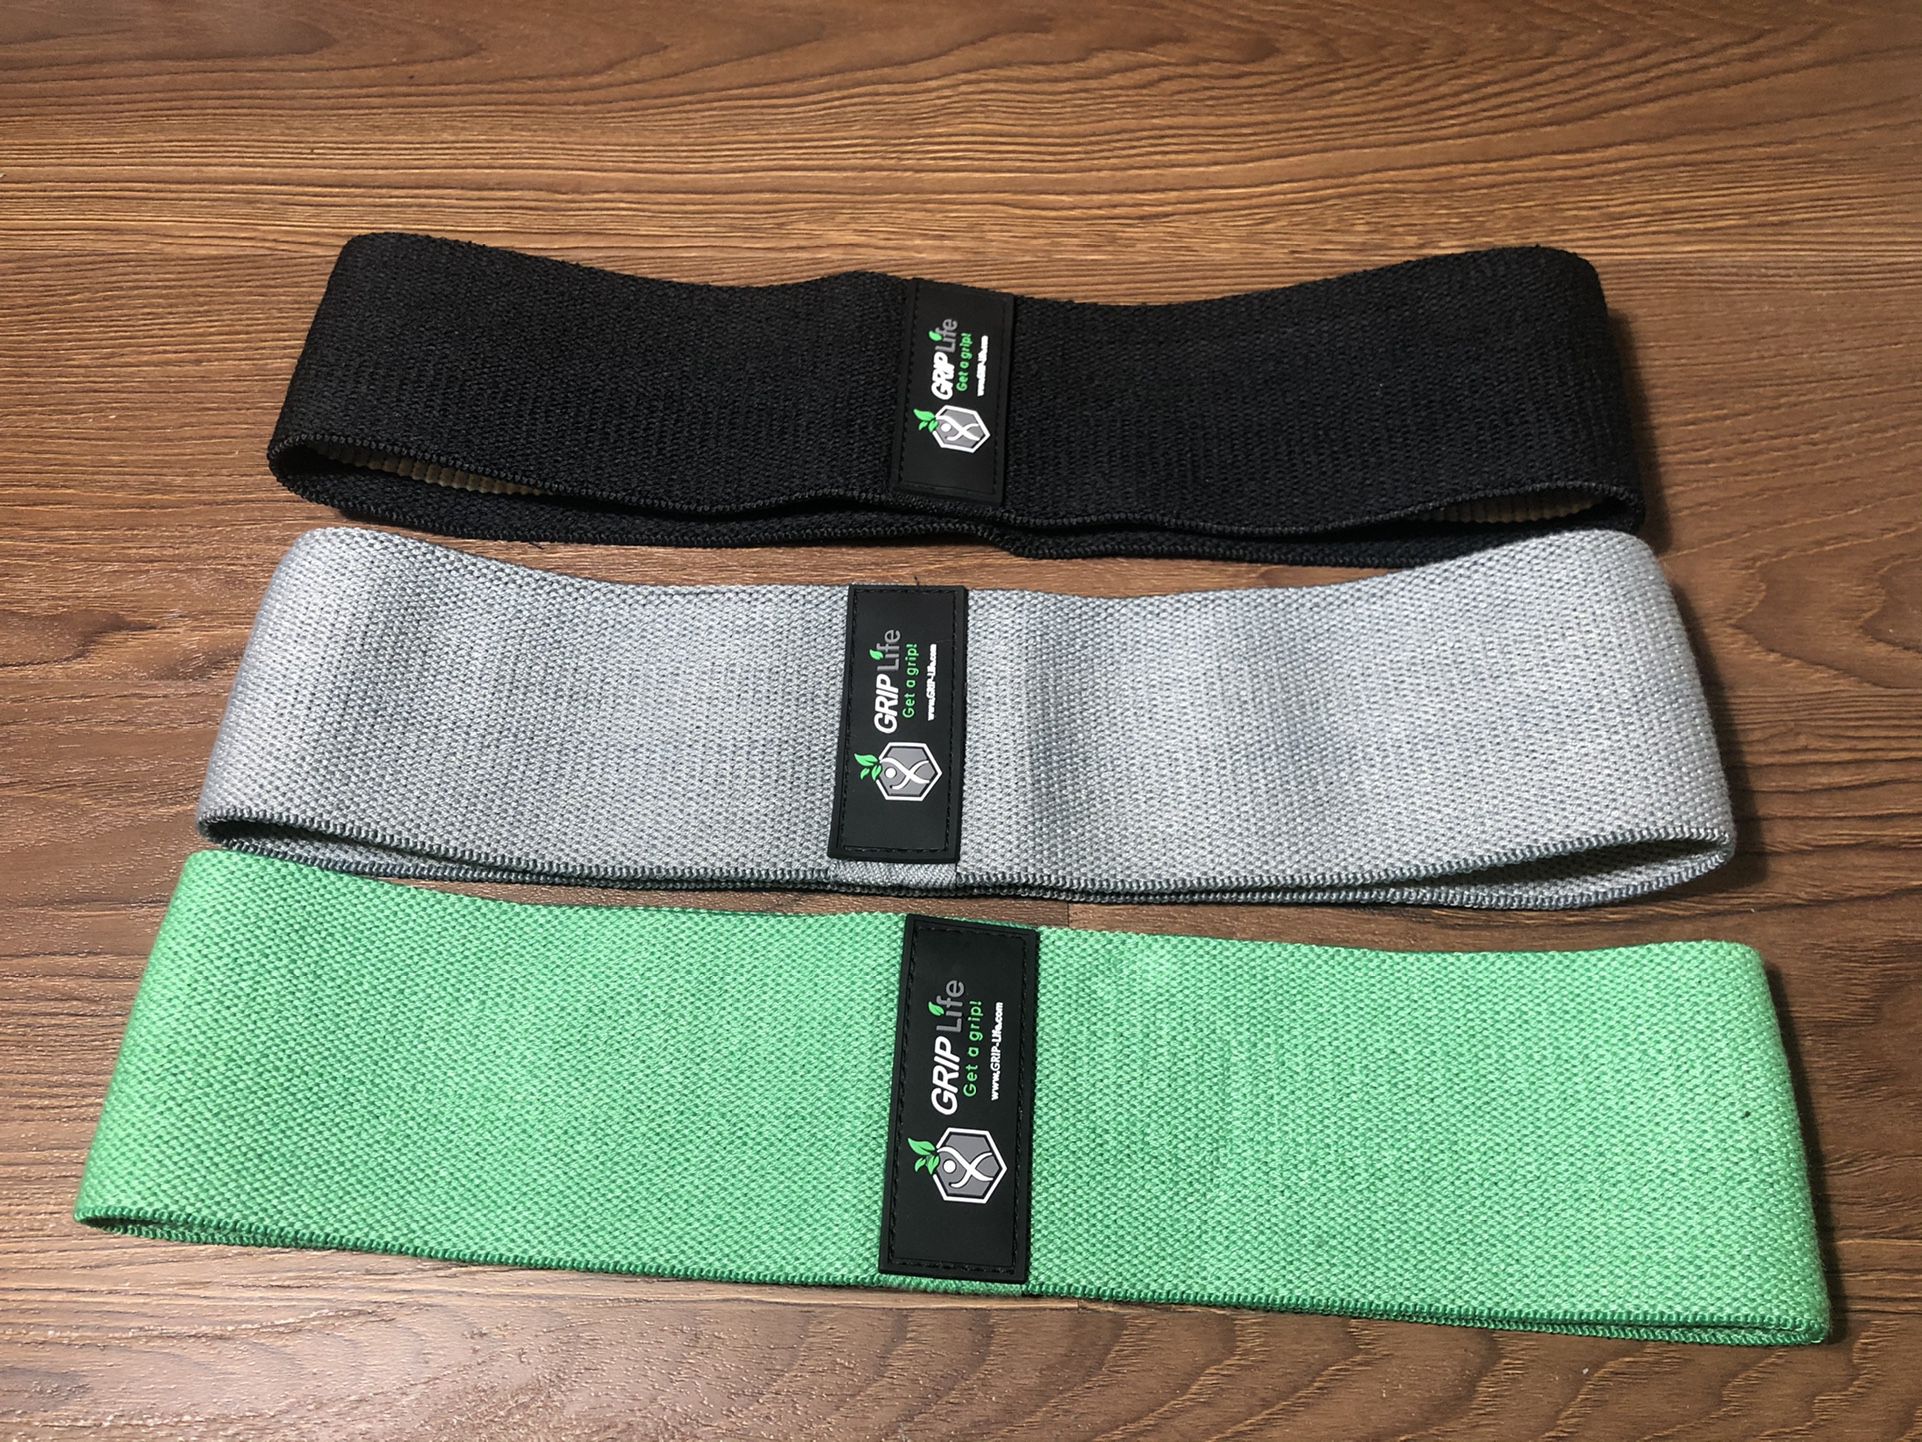 PREMIUM GRIP Life Hip Booty Bands Fabric Resistance Bands for Gym Home Workout (Set of 3)